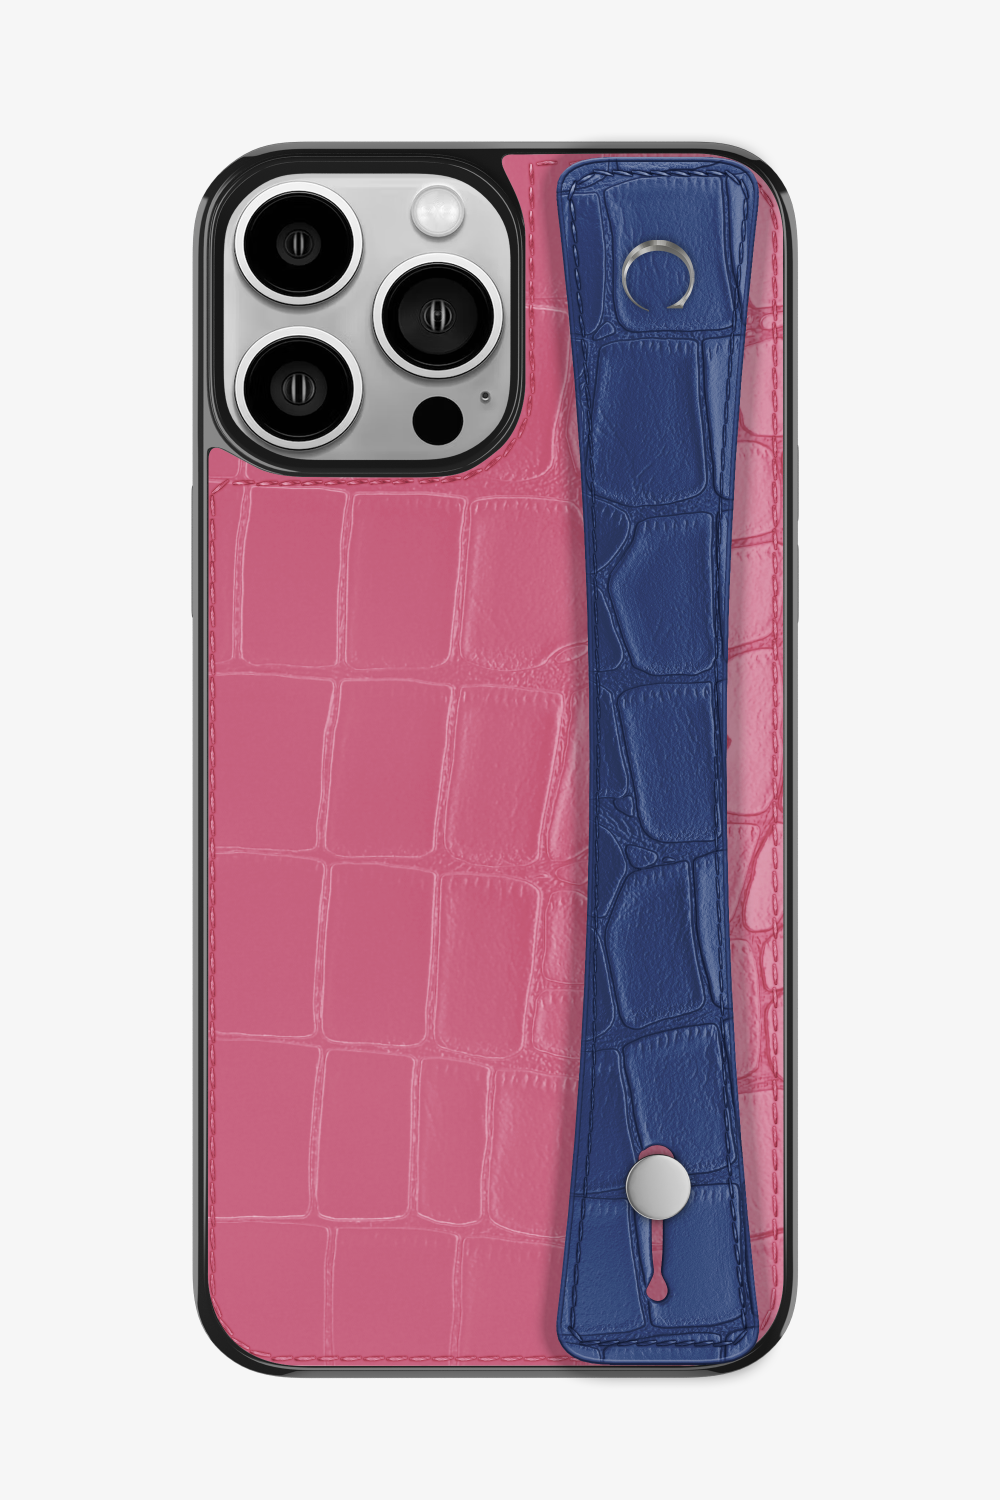 Alligator Sports Strap Case for iPhone 14 Pro Max - Pink / Navy Blue - zollofrance